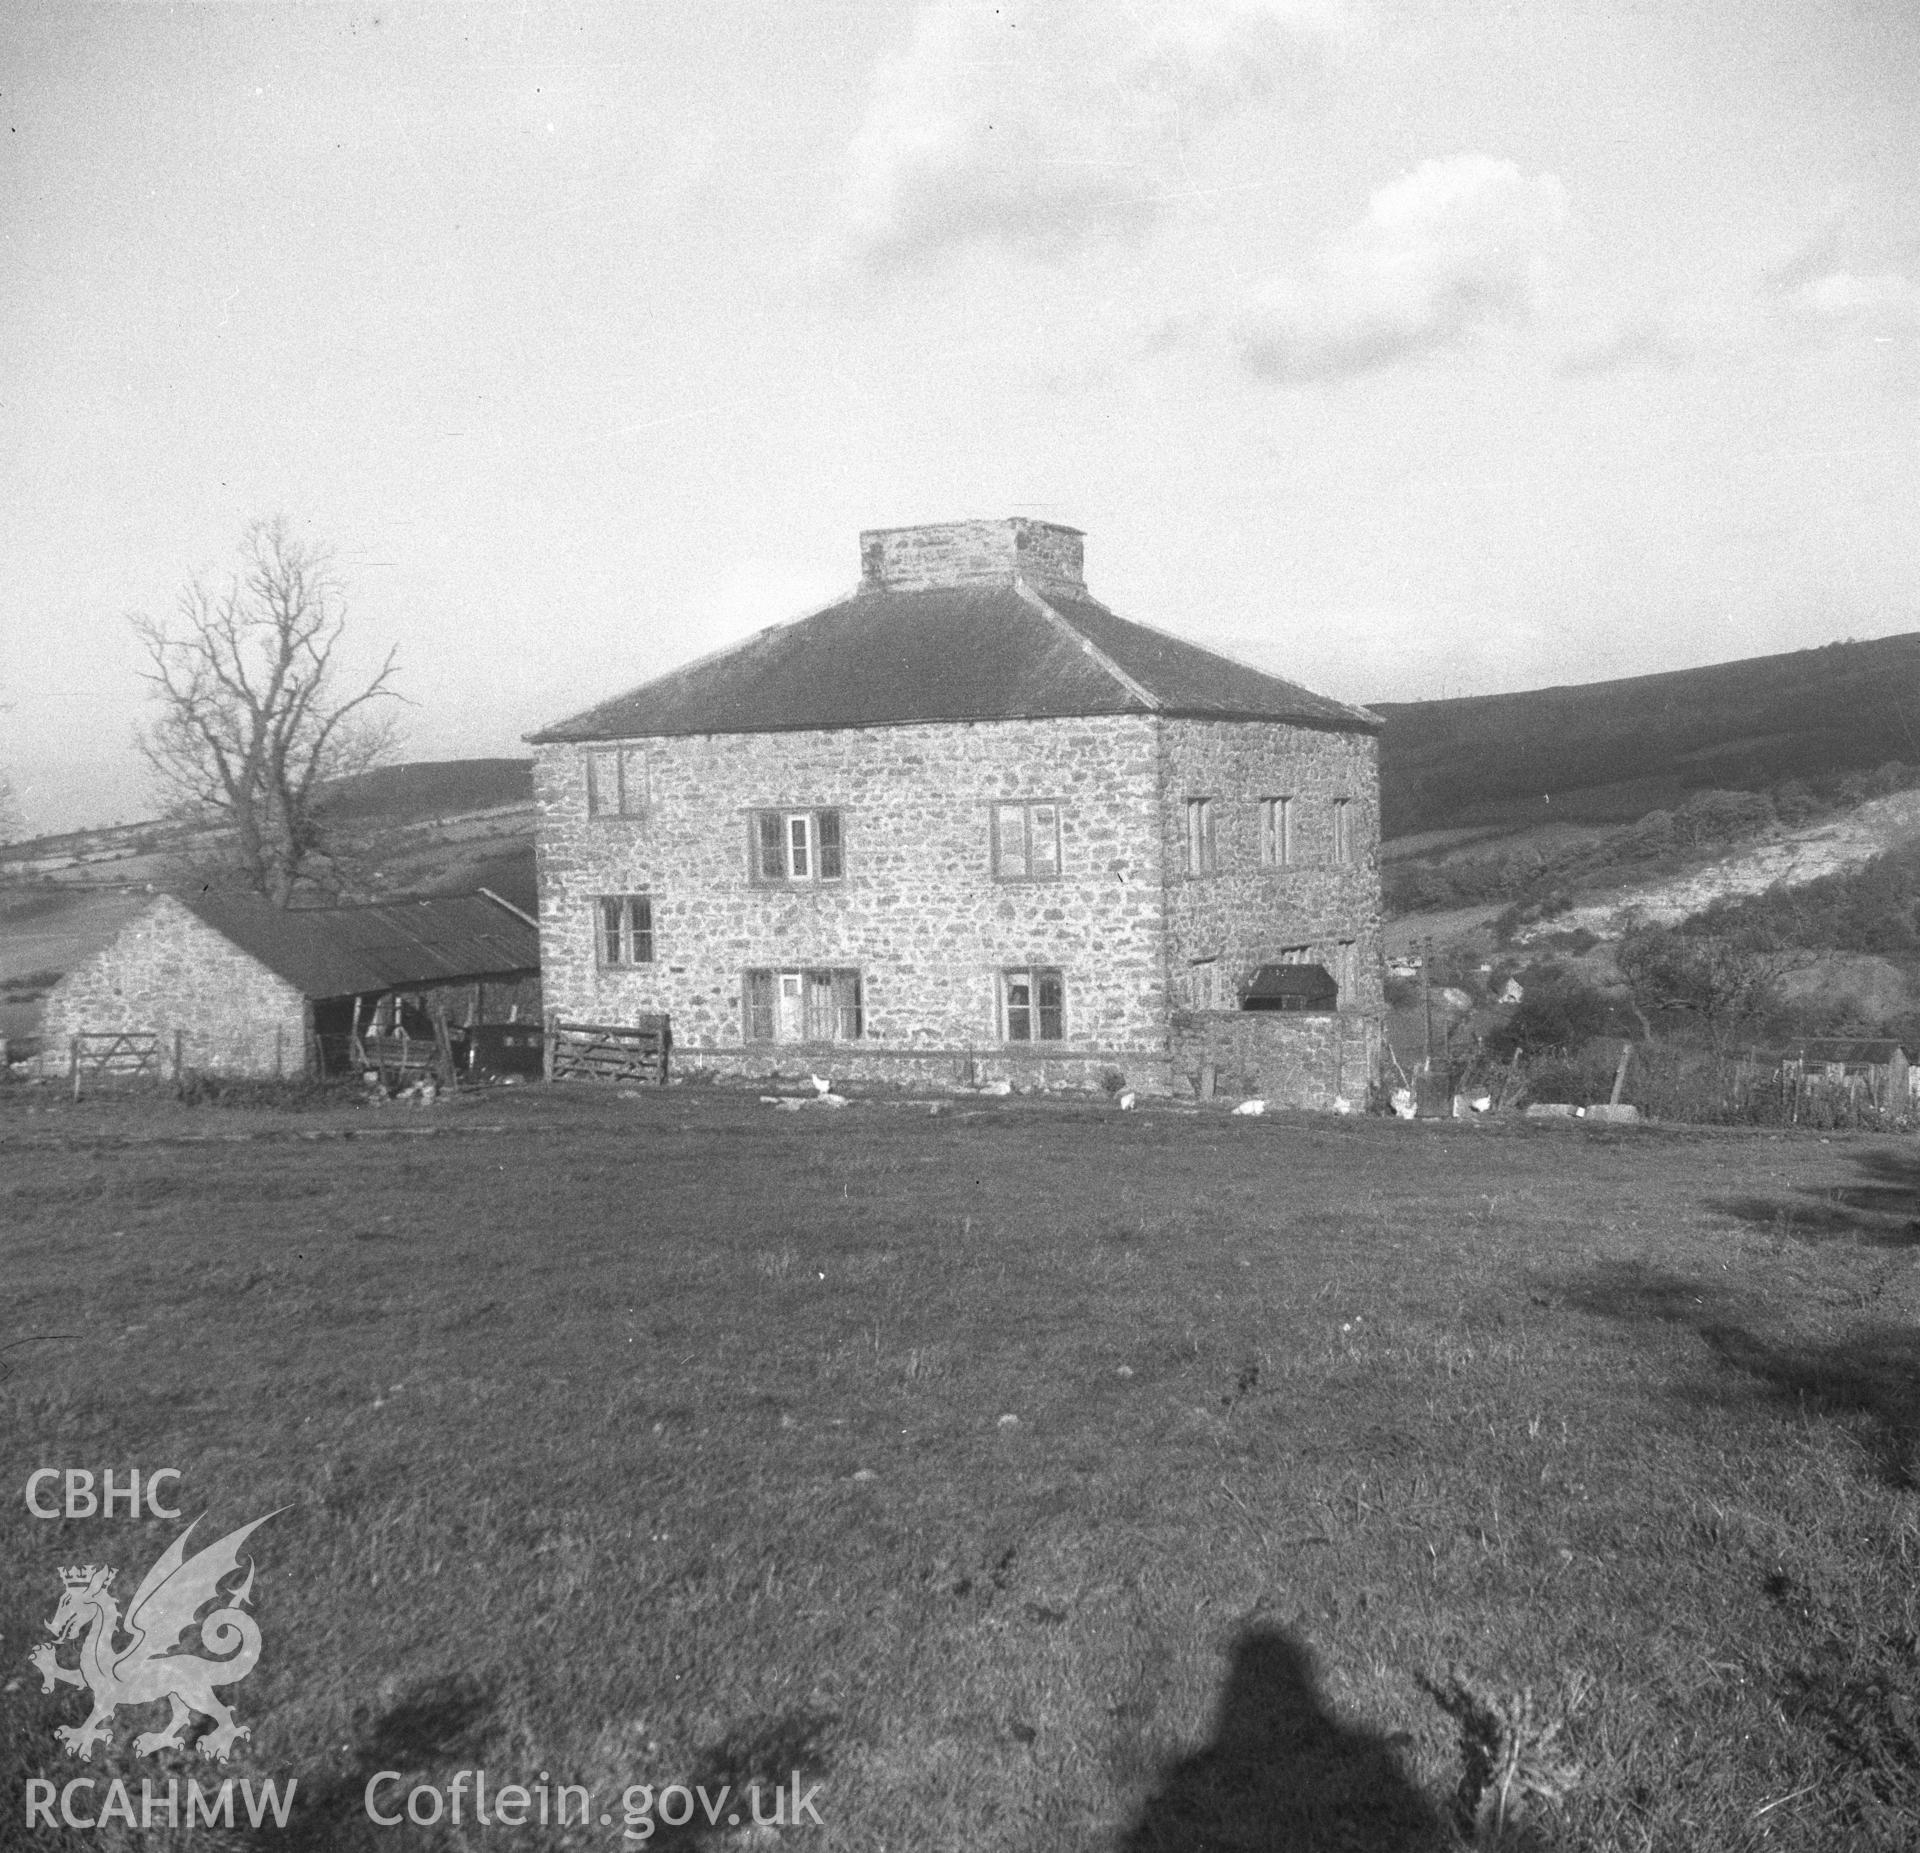 Black and white acetate negative showing exterior view of Trimley Hall, Llanfynydd.